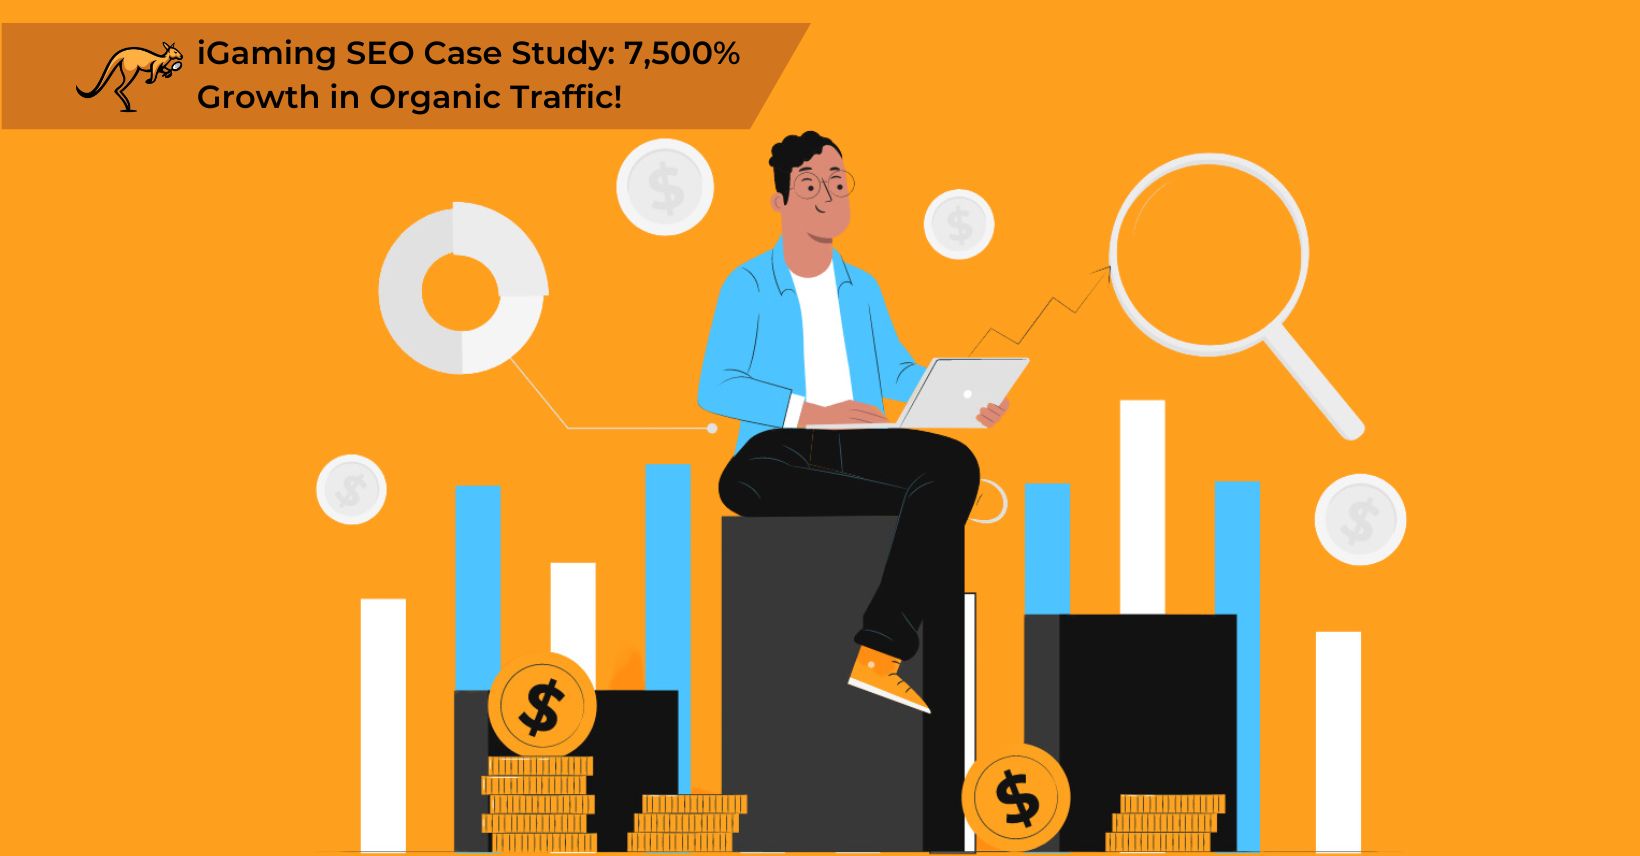 igaming-seo-case-study-7500-percent-growth-infographic-1640x856